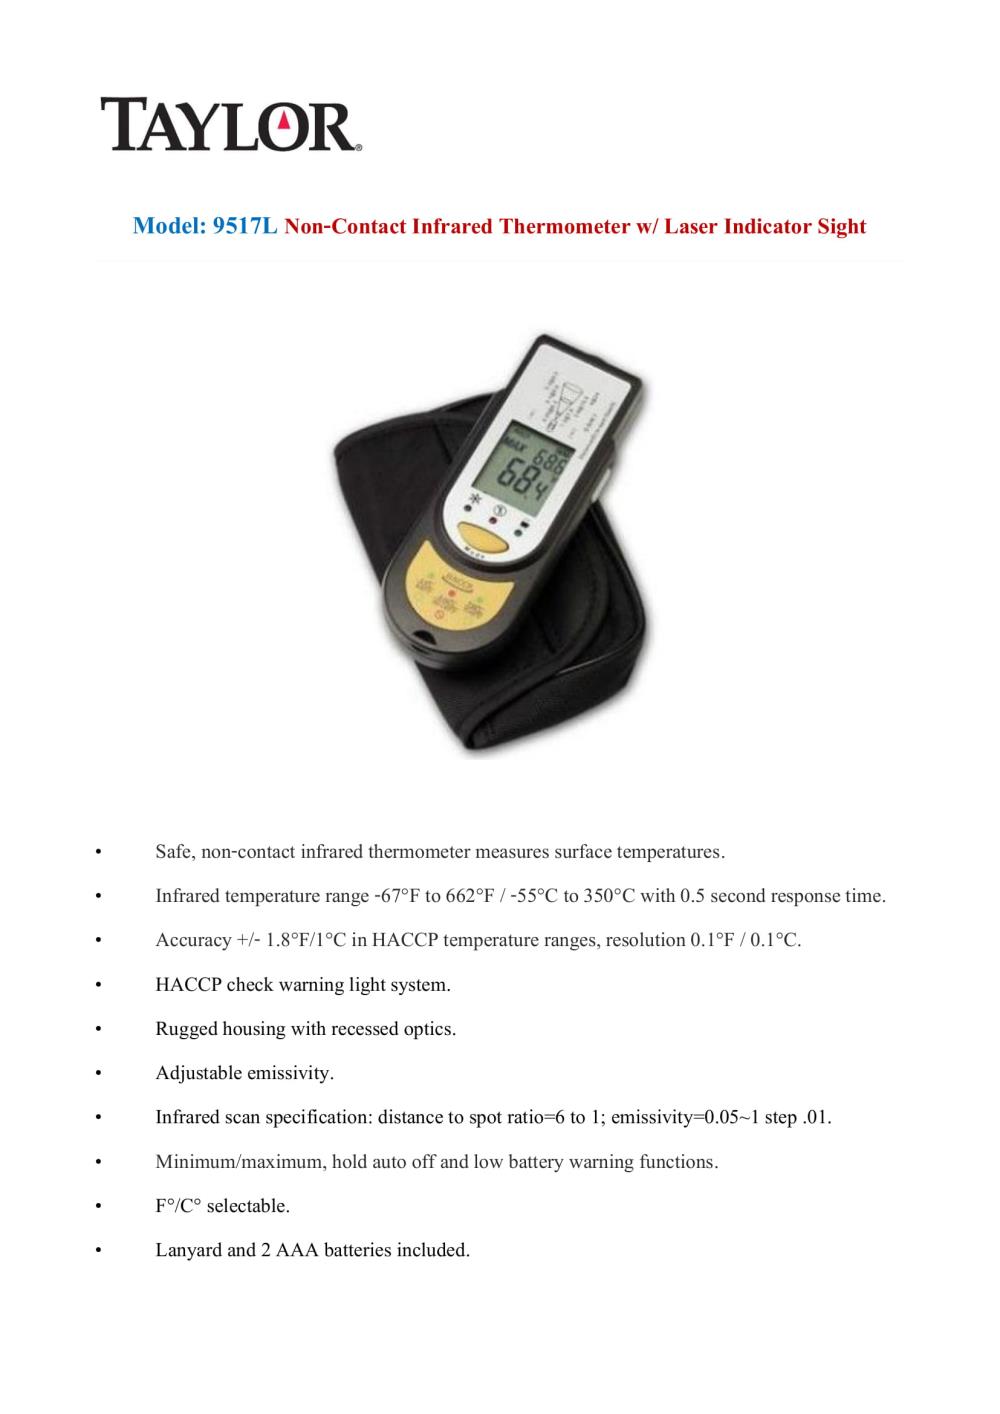 Taylor Non Contact Infrared Thermometer Laser Model 9517L